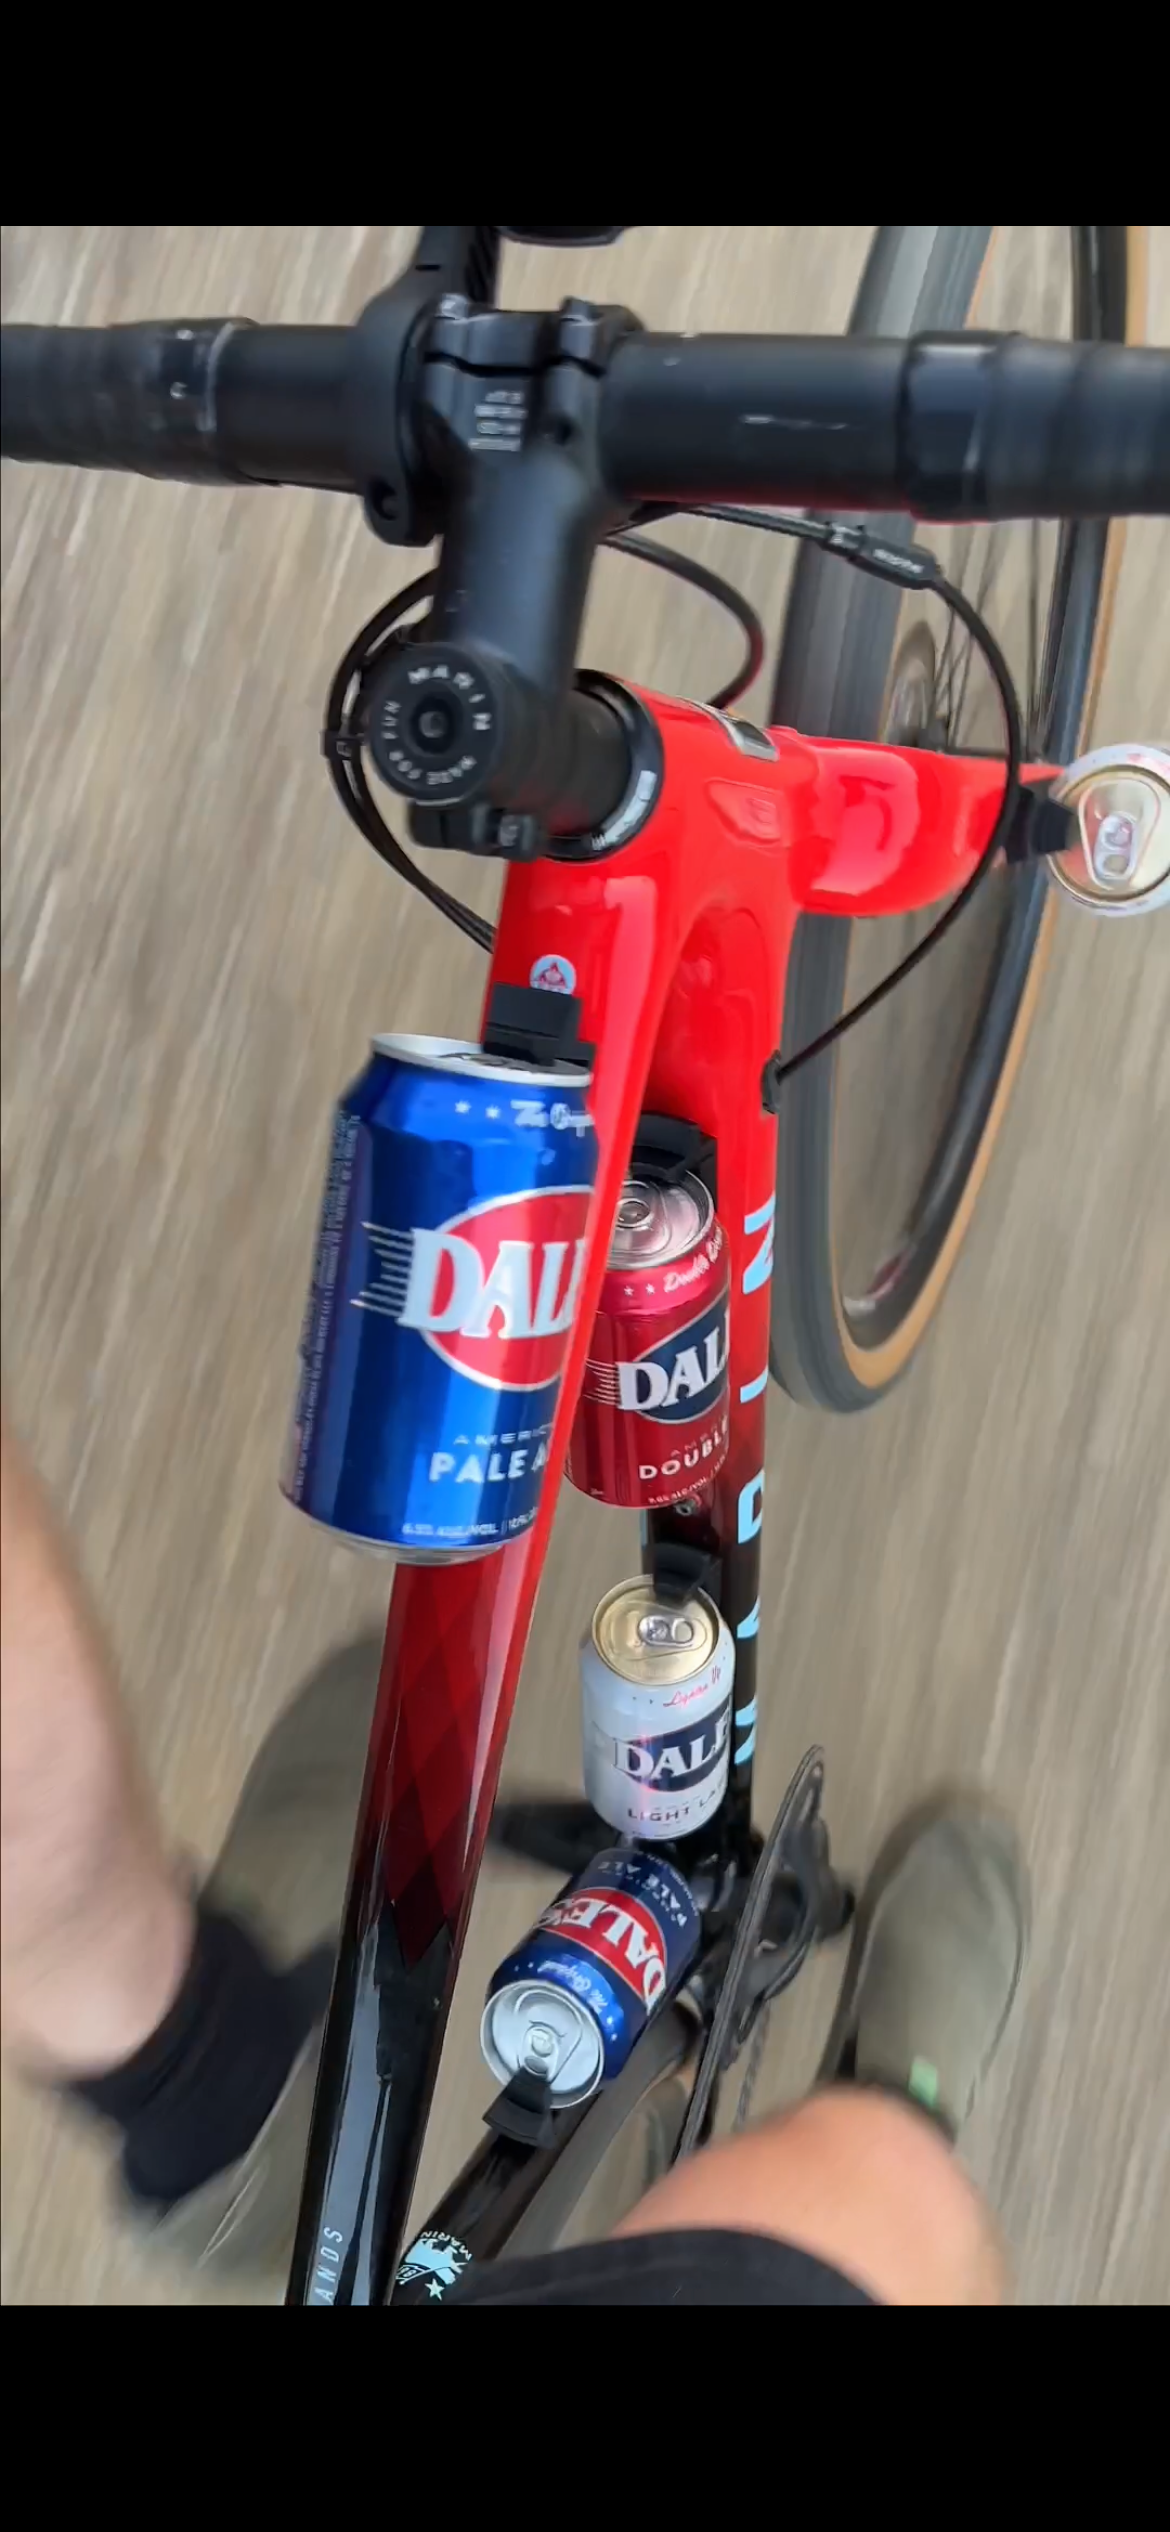 3D files for bicycle can holder